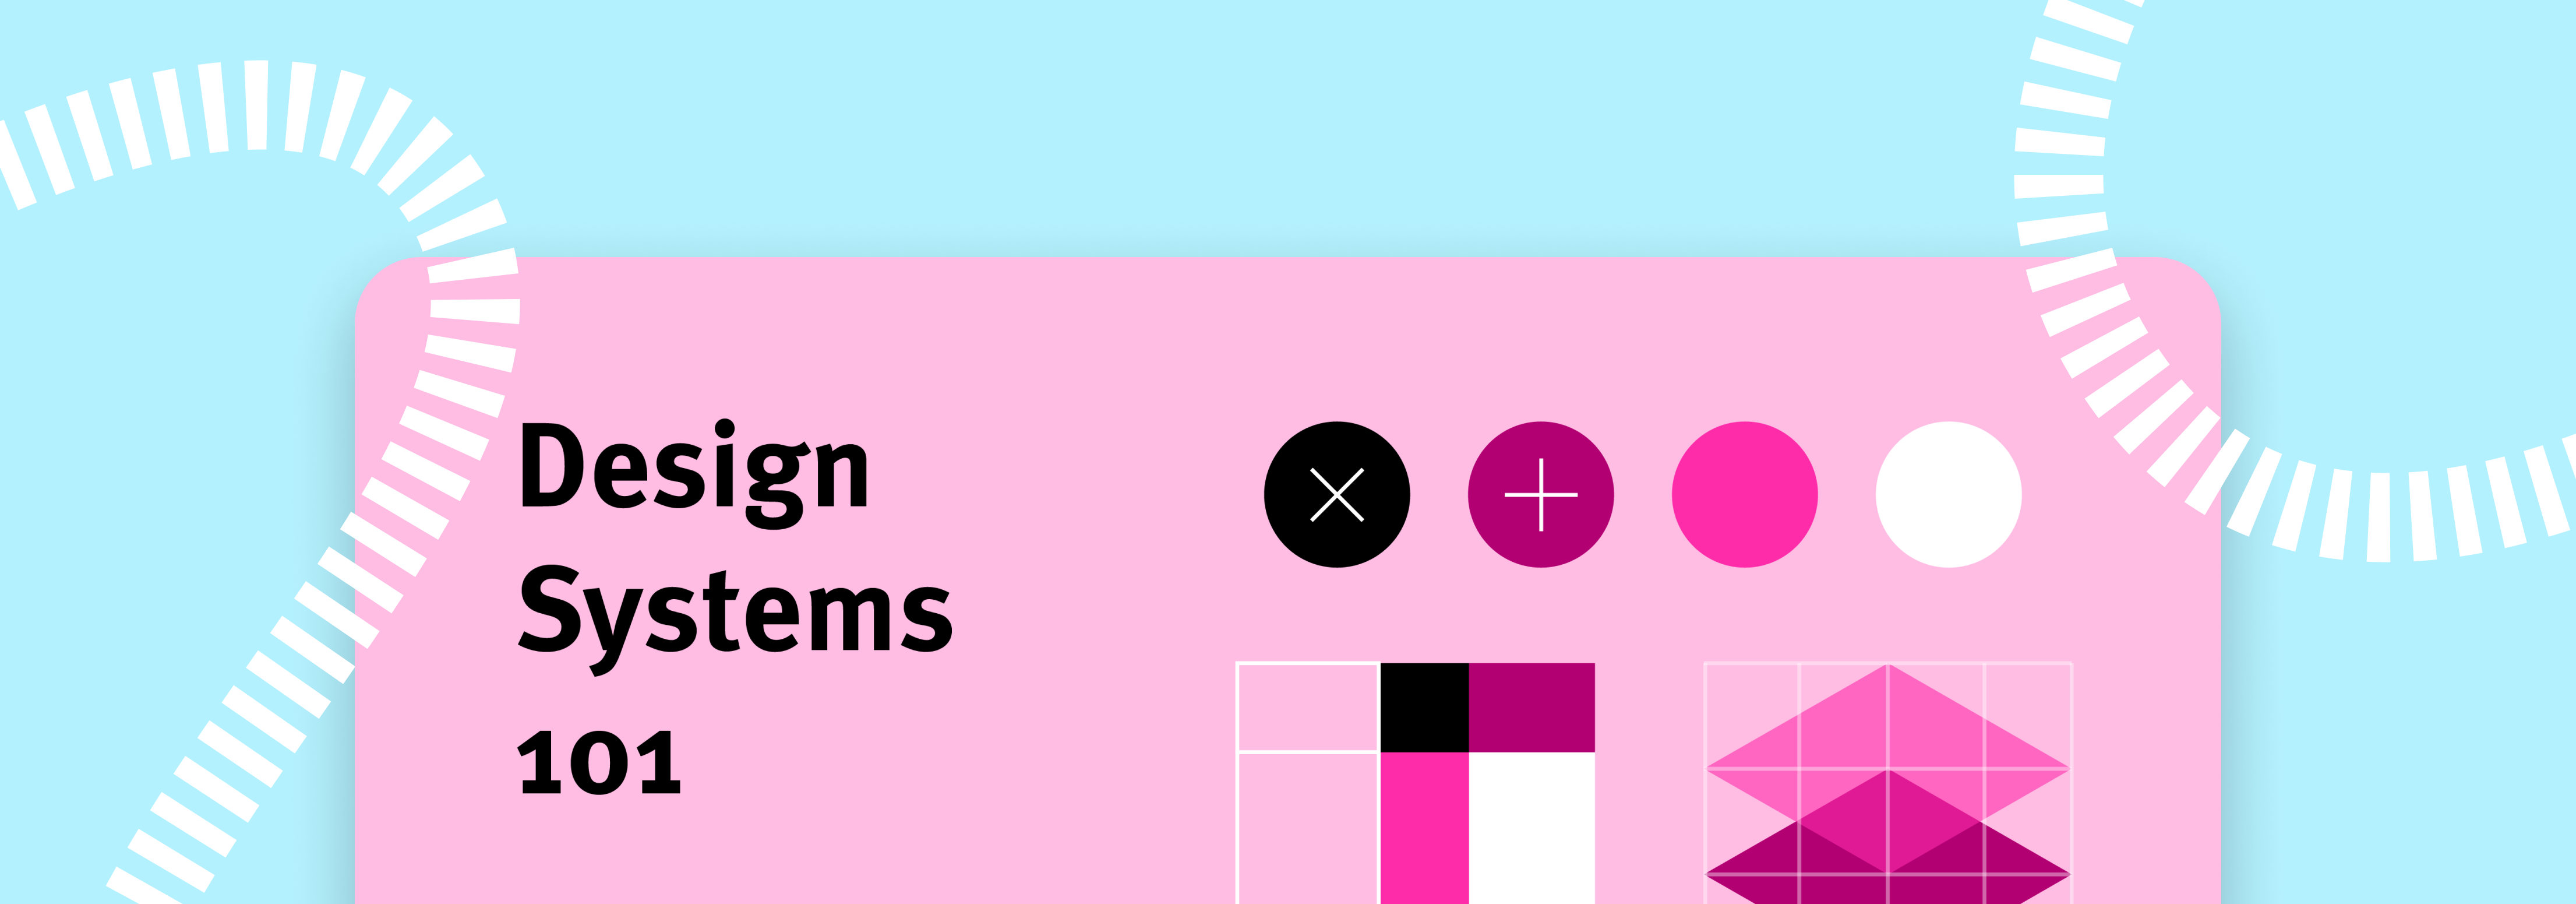 Image showing design system elements such as low fidelity buttons and shapes, on a pink and blue background